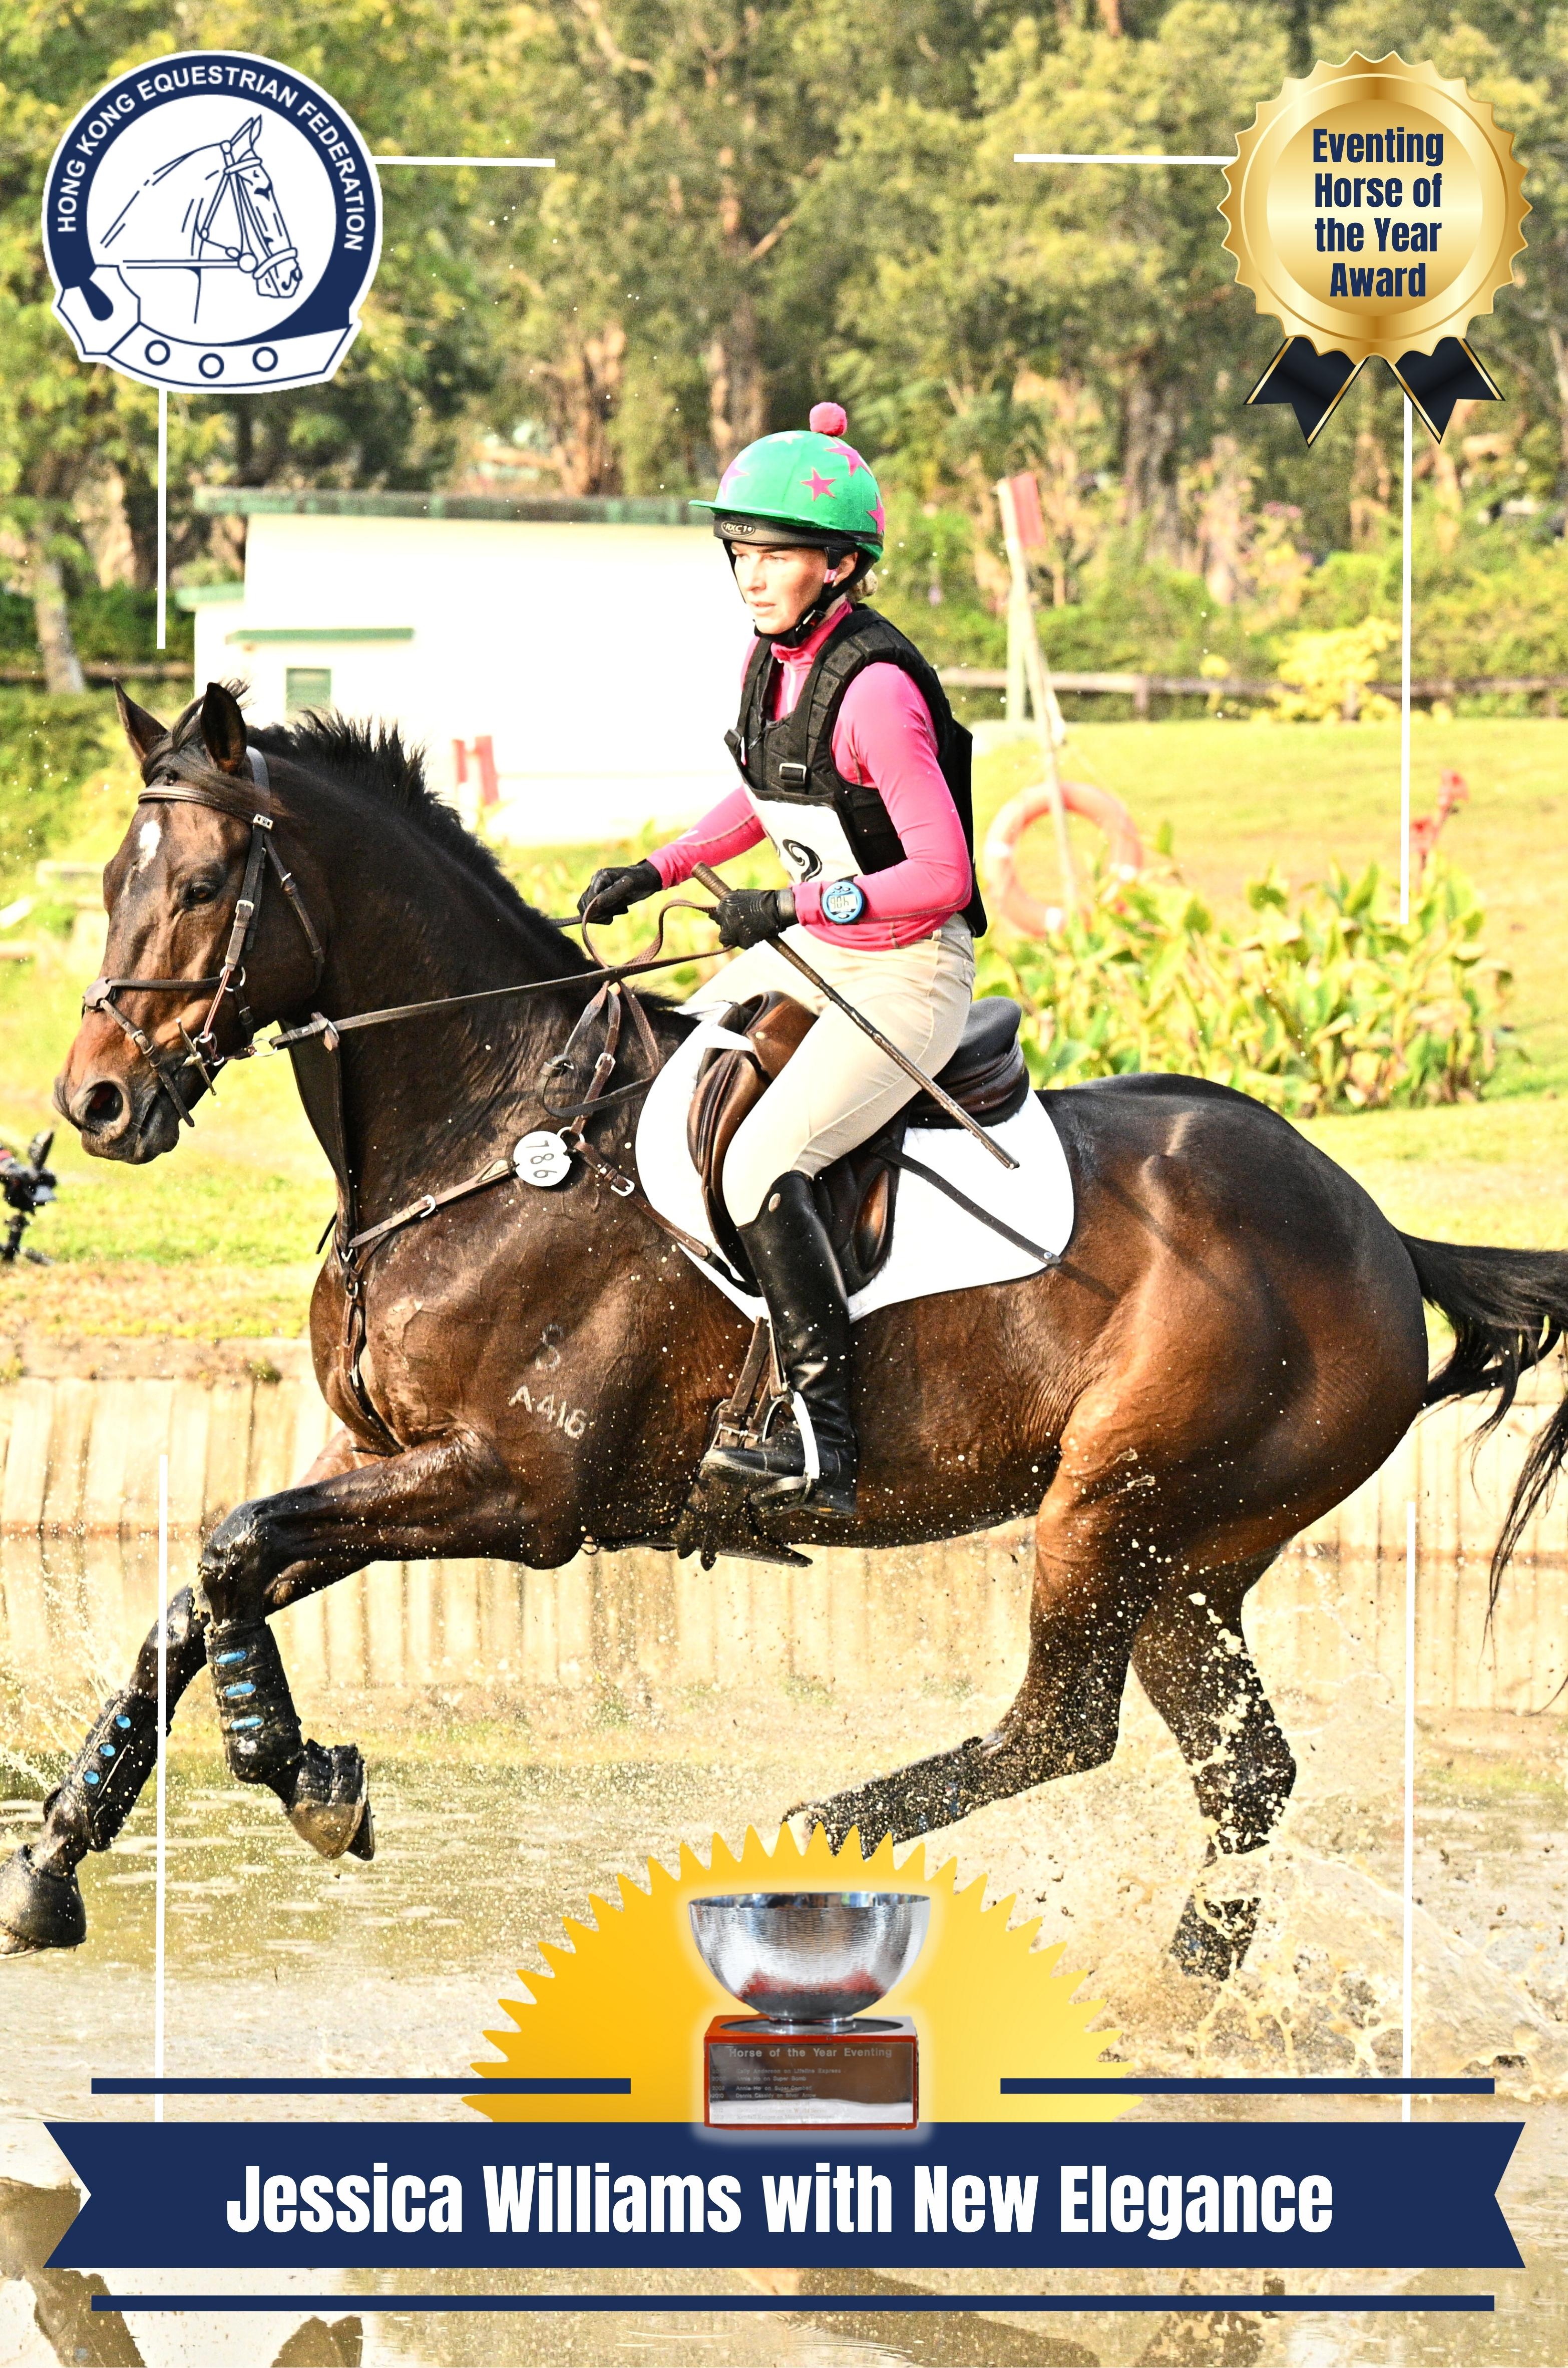 Eventing Horse of the Year Award_Jessica Williams with New Elegance